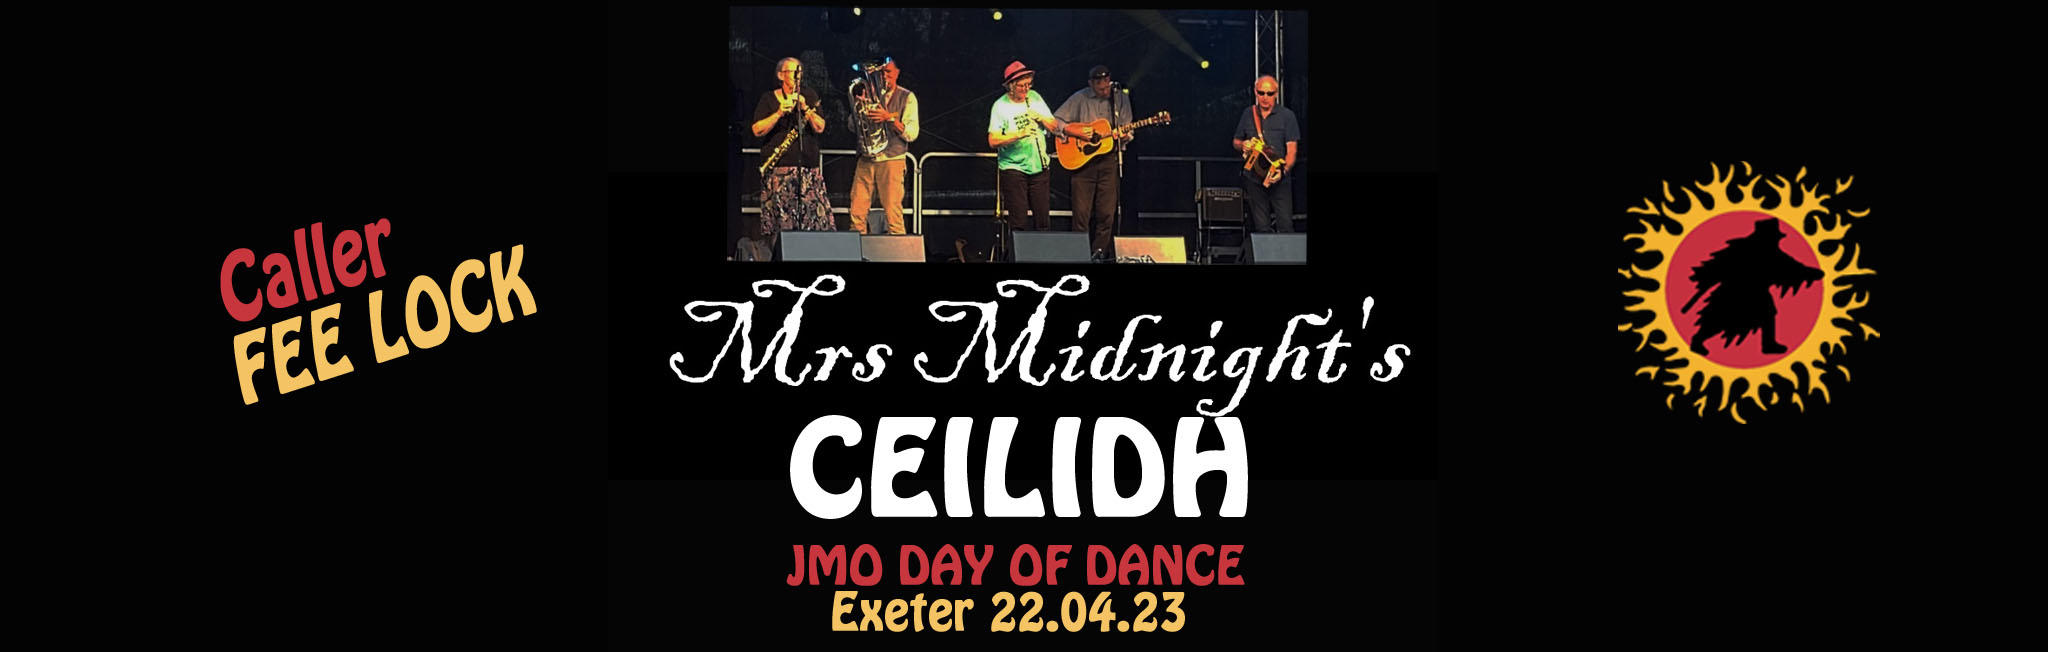 Ceilidh with Mrs Midnight & caller Fee Lock at the JMO Day of Dance 2023